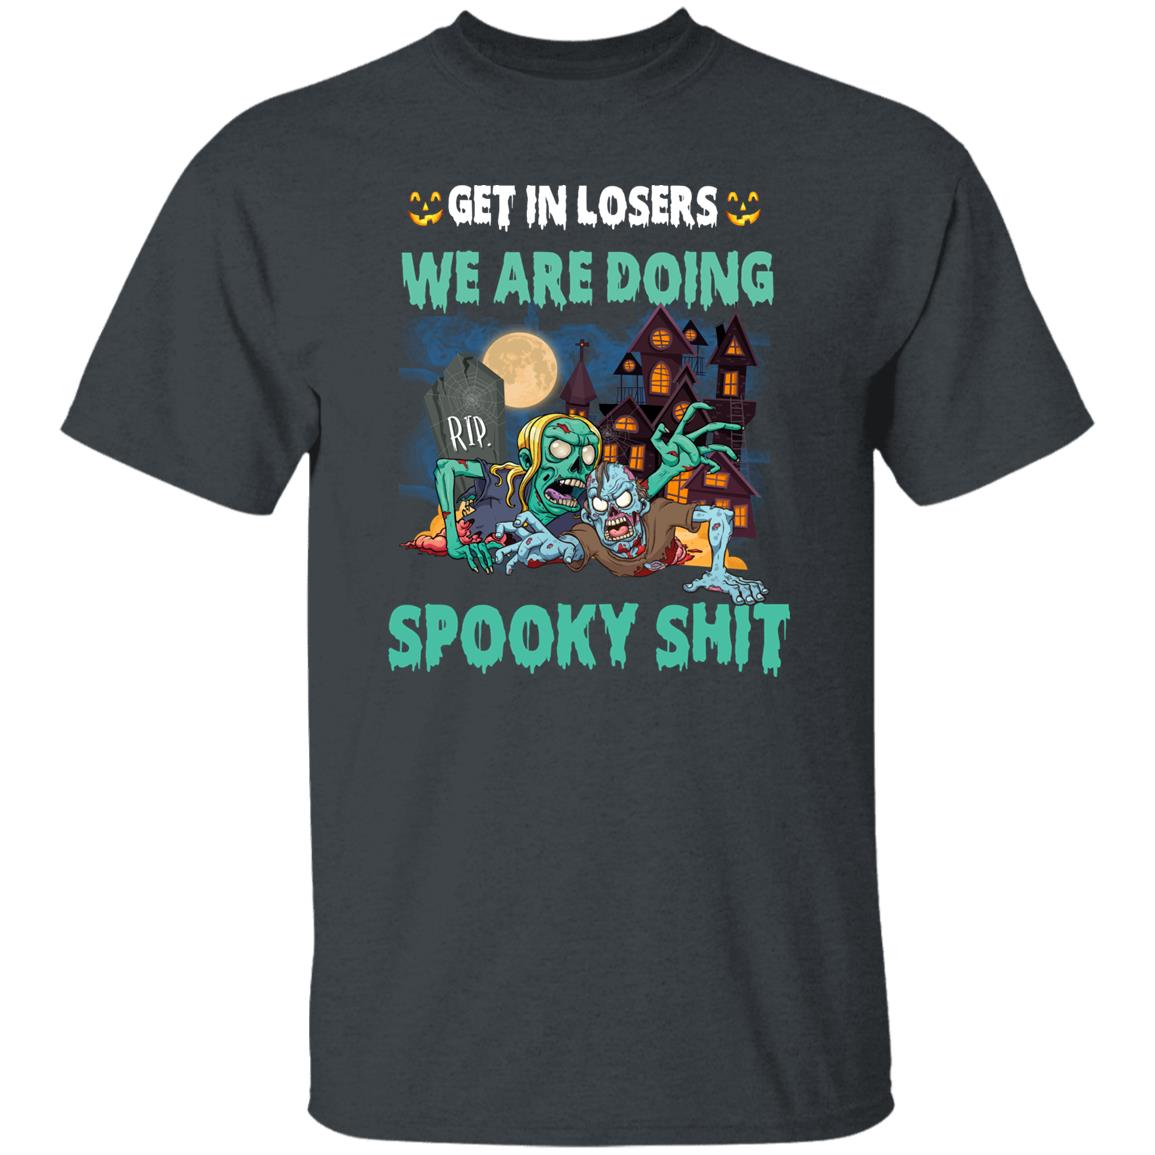 Get in Losers We Are Doing Spooky Shit Zombie Shirt